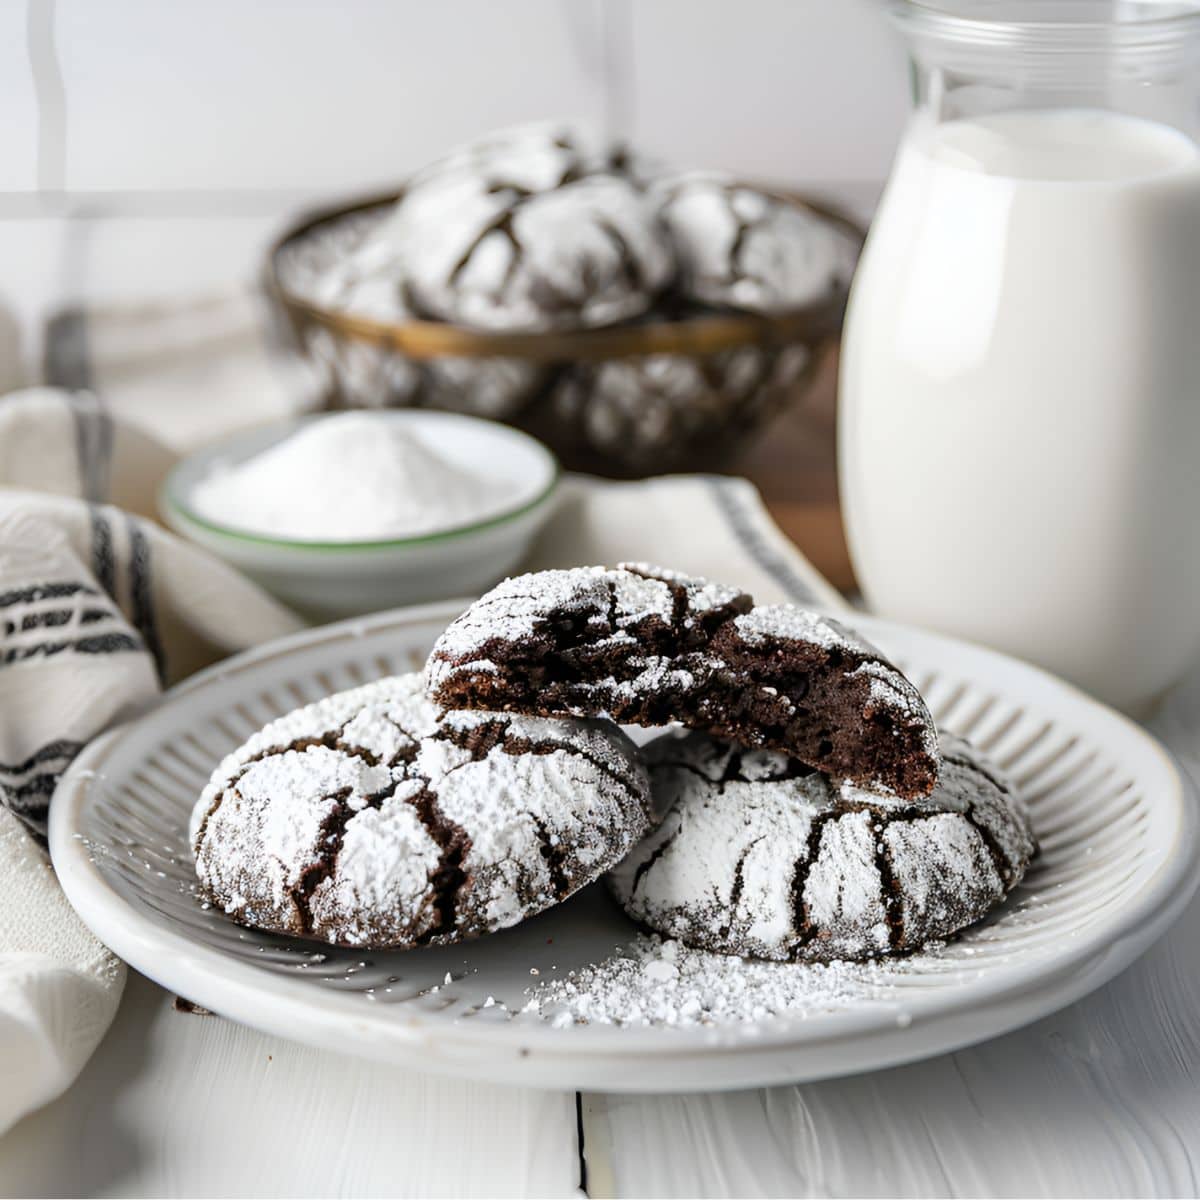 Three Fudge Crinkle Cookies on a Plate, One with a Bite Out with A Glass of Milk, a Bowl of Powdered Sugar, and a Basket of Fudge Crinkle Cookies in the Background